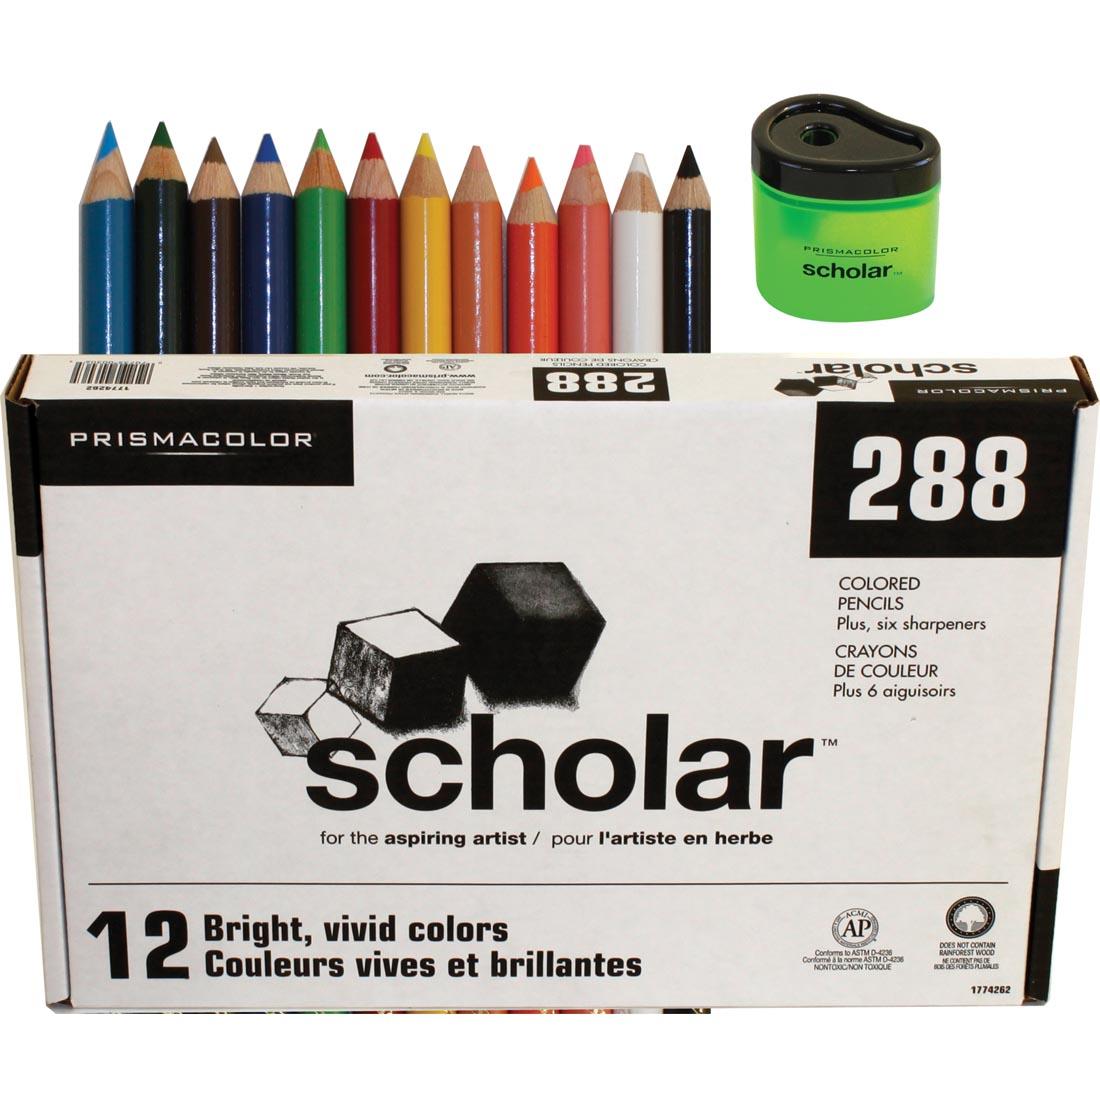 Prismacolor Scholar Colored Pencils 288-Count Set Box shown with the 12 colors of pencils and a pencil sharpener